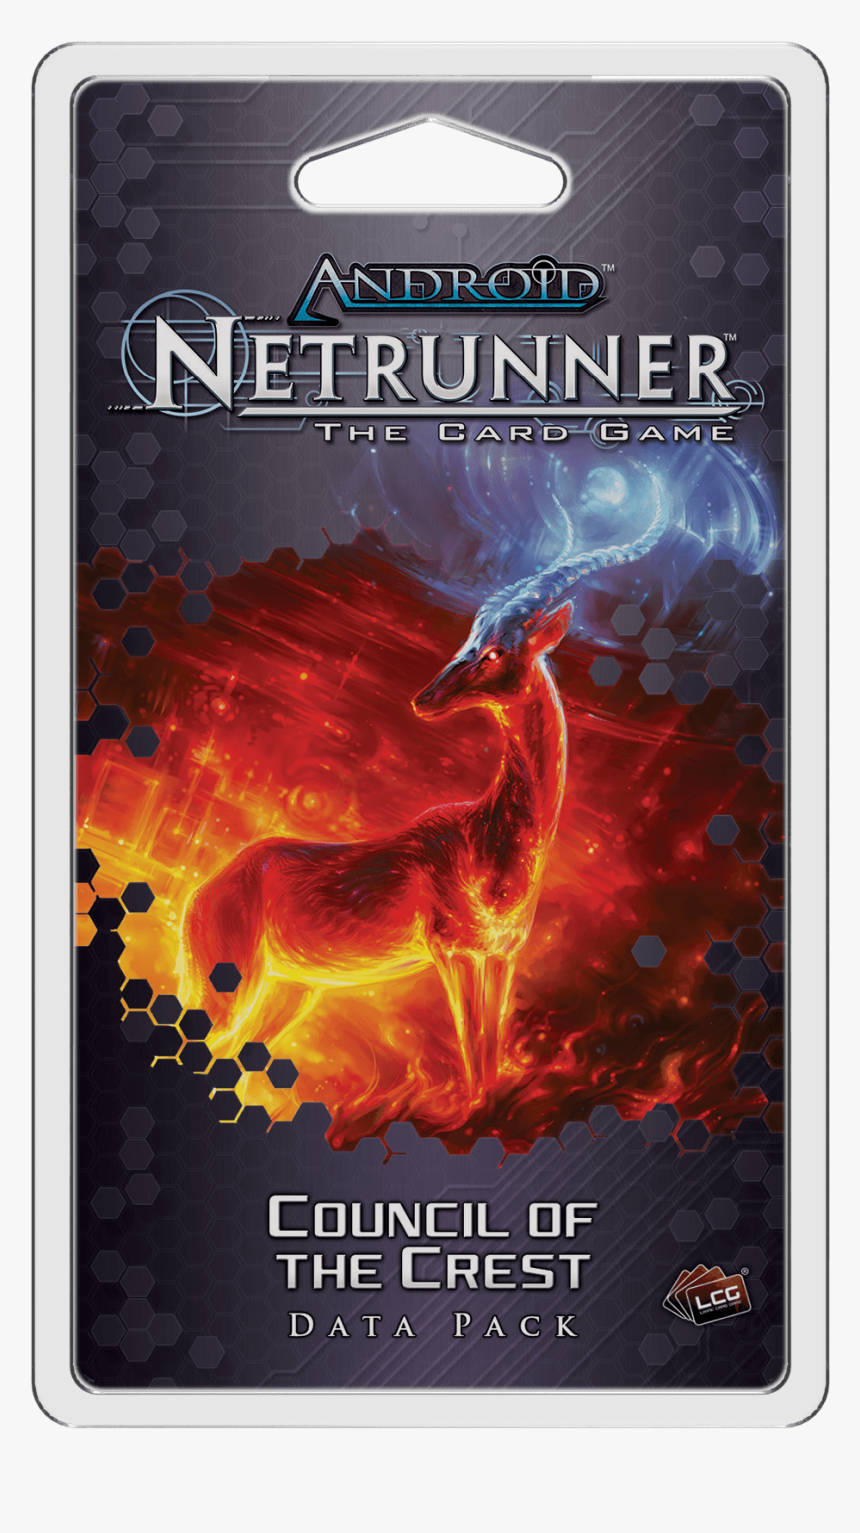 Council Of The Crest - Netrunner Council Of The Crest, HD Png Download, Free Download